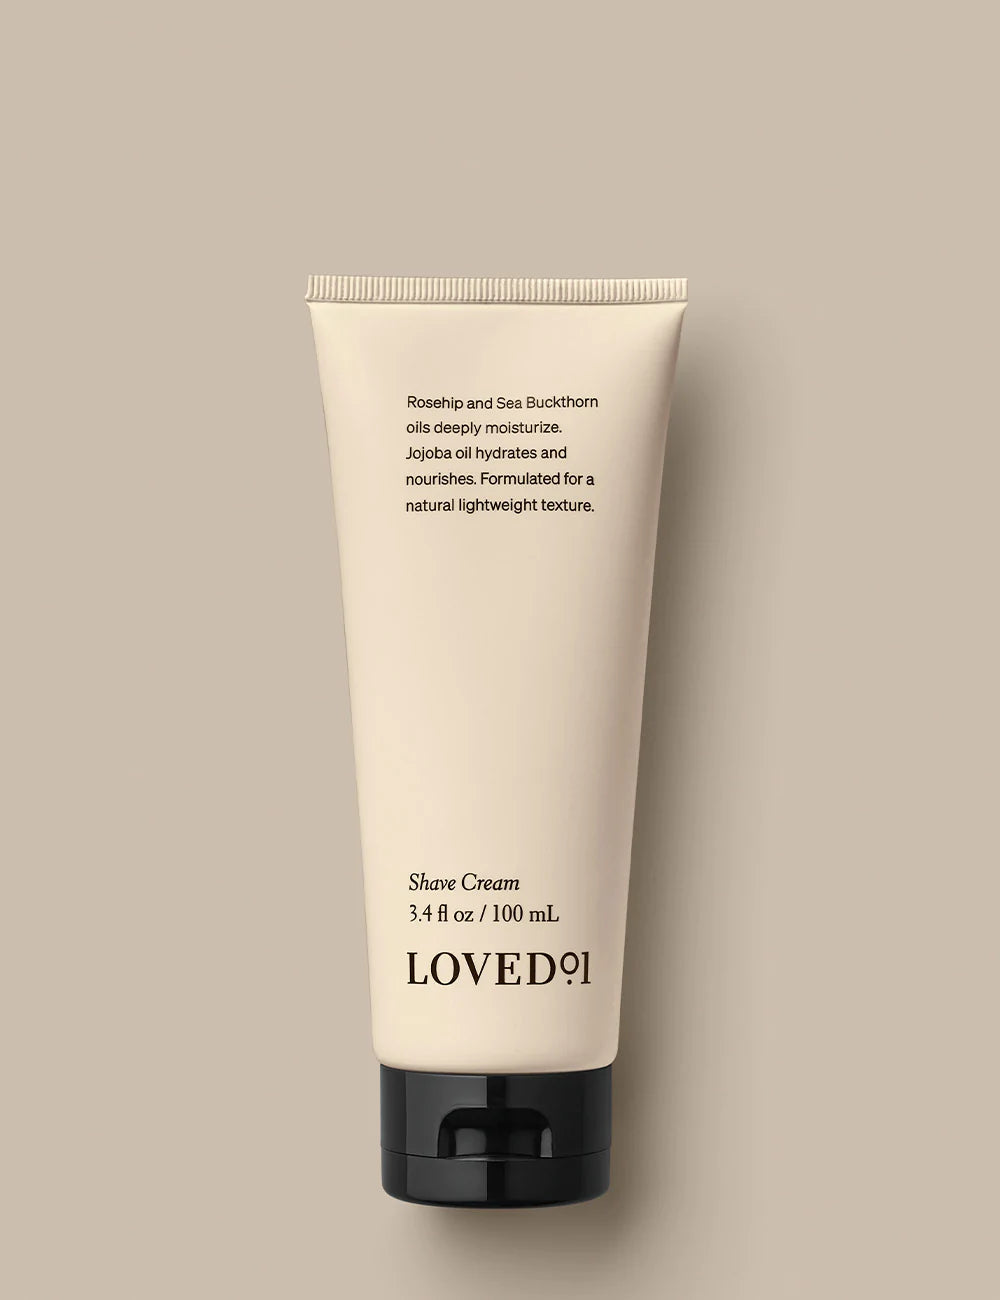 Product image with a tan background. The image shows the Shave Cream..